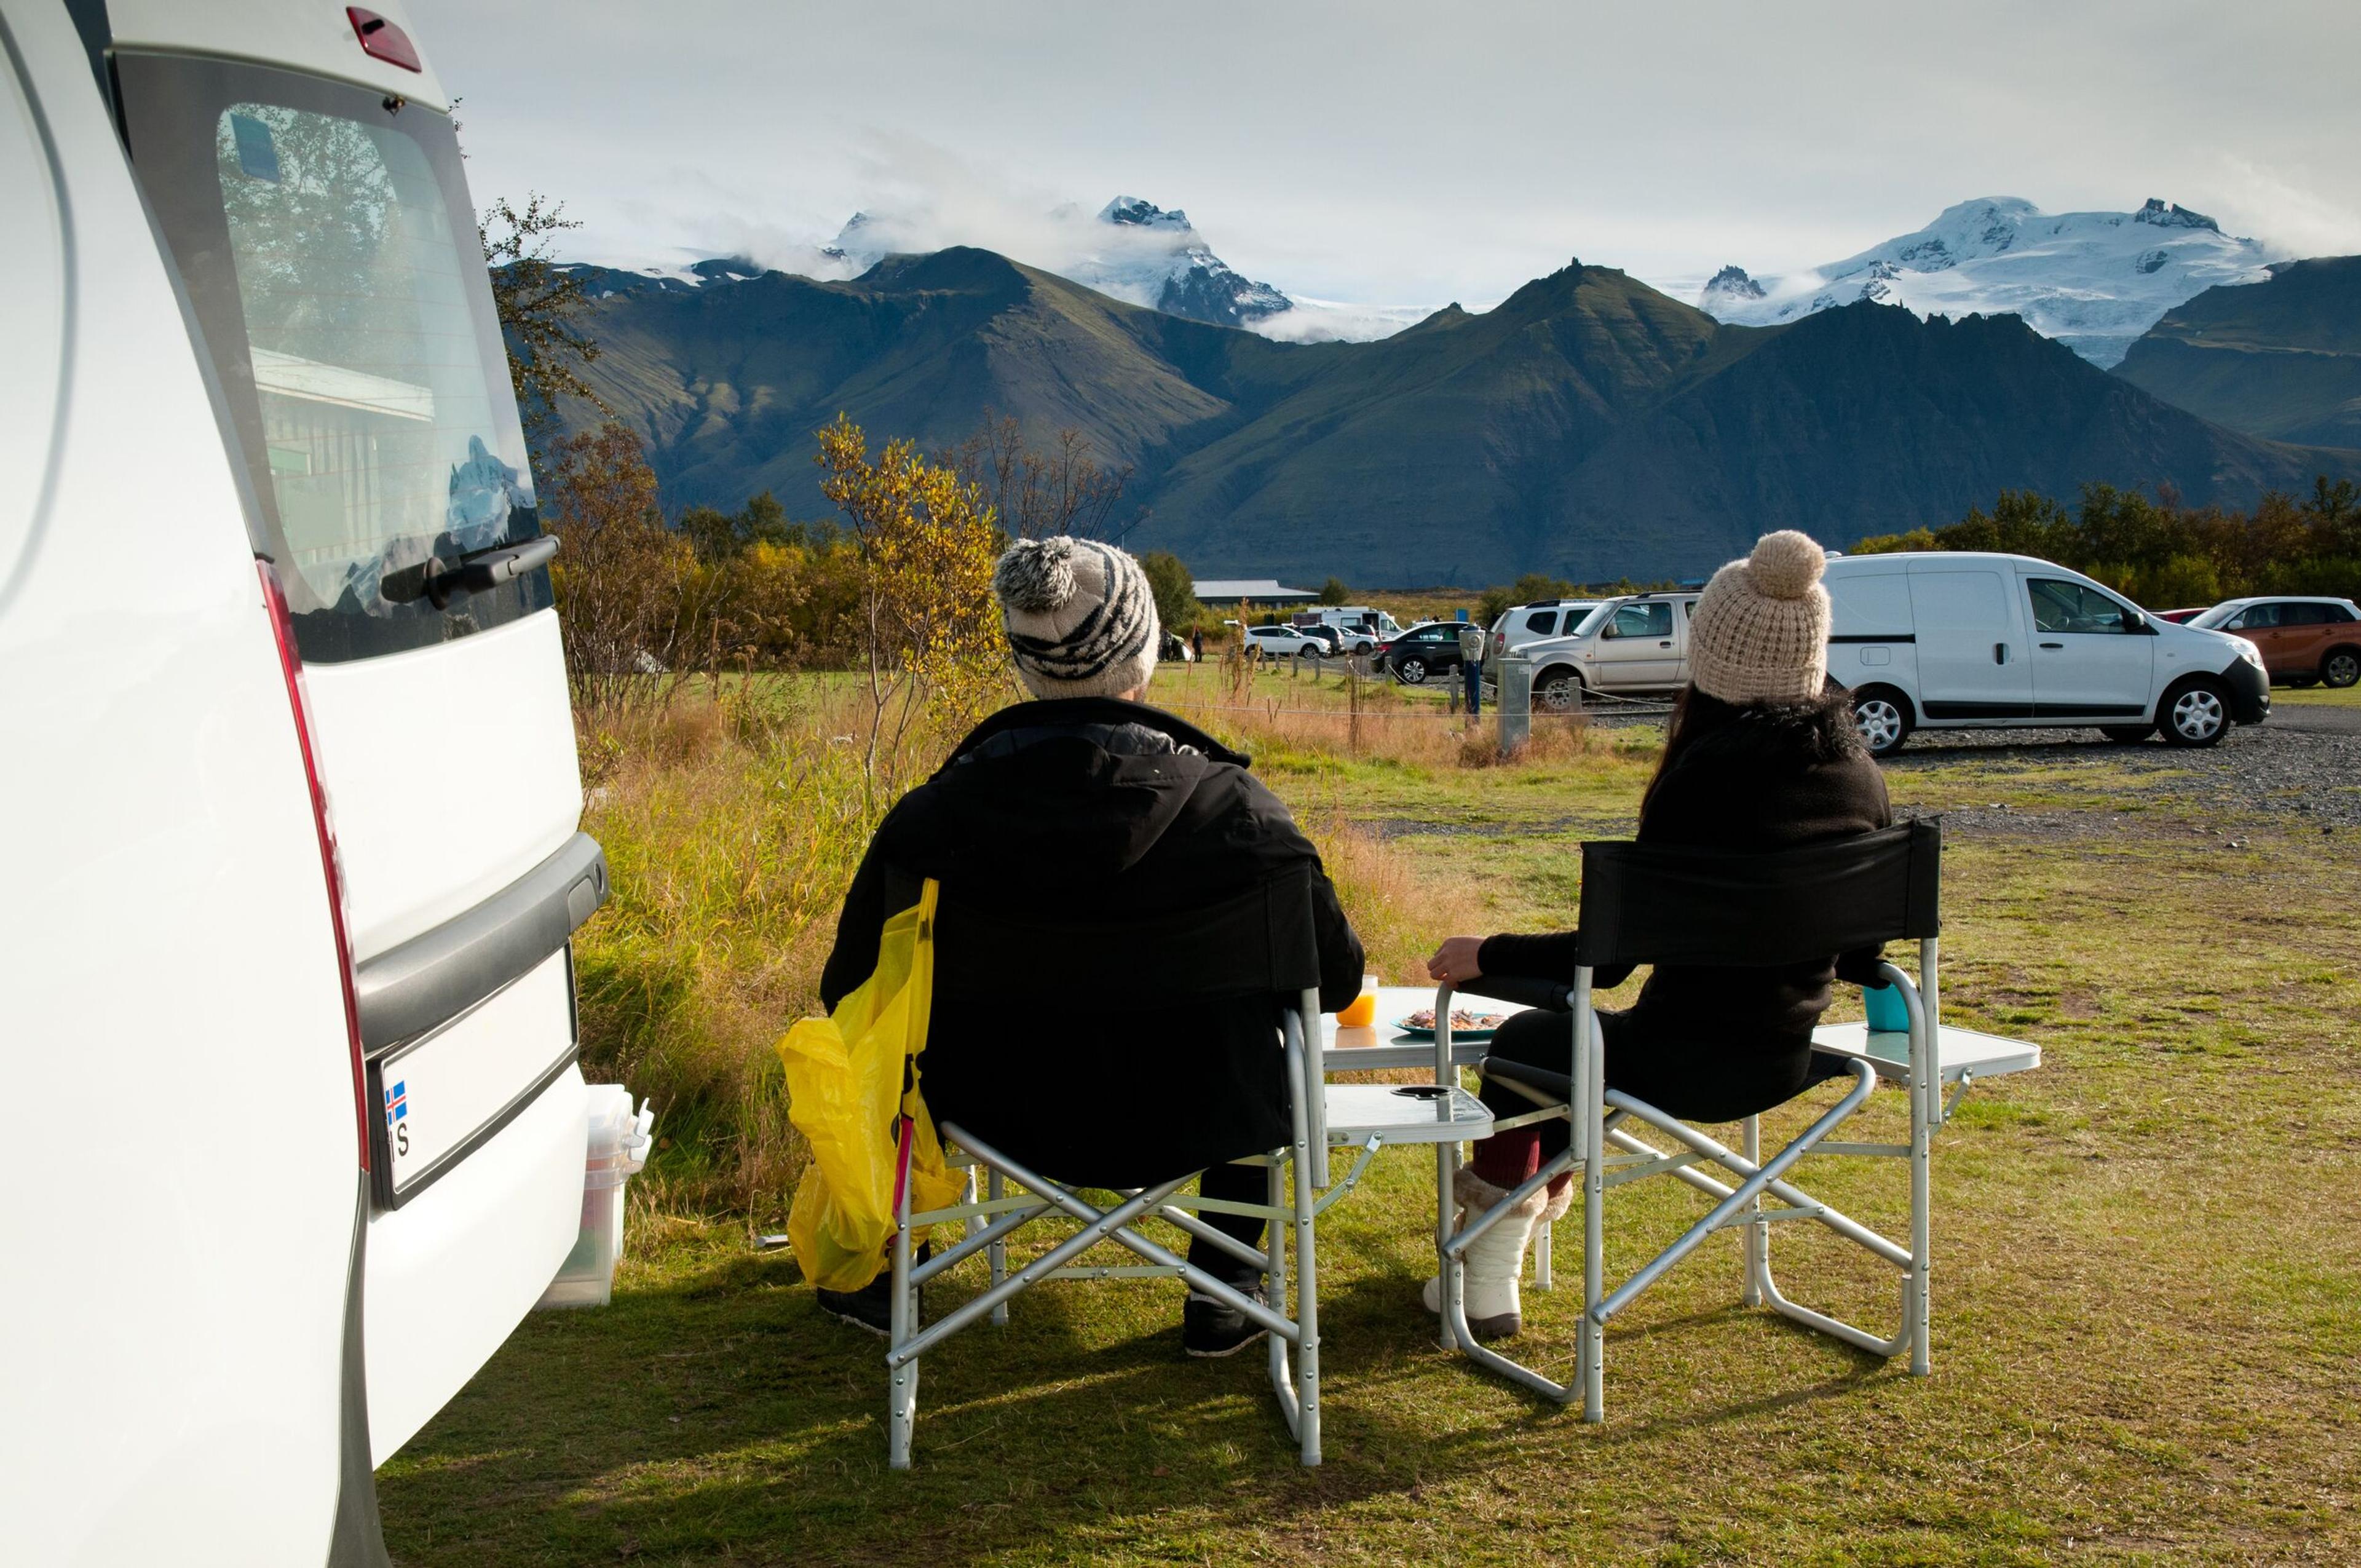 Two people seated in camping chairs beside a vehicle, enjoying a view of distant mountains with snow-capped peaks under a partly cloudy sky.